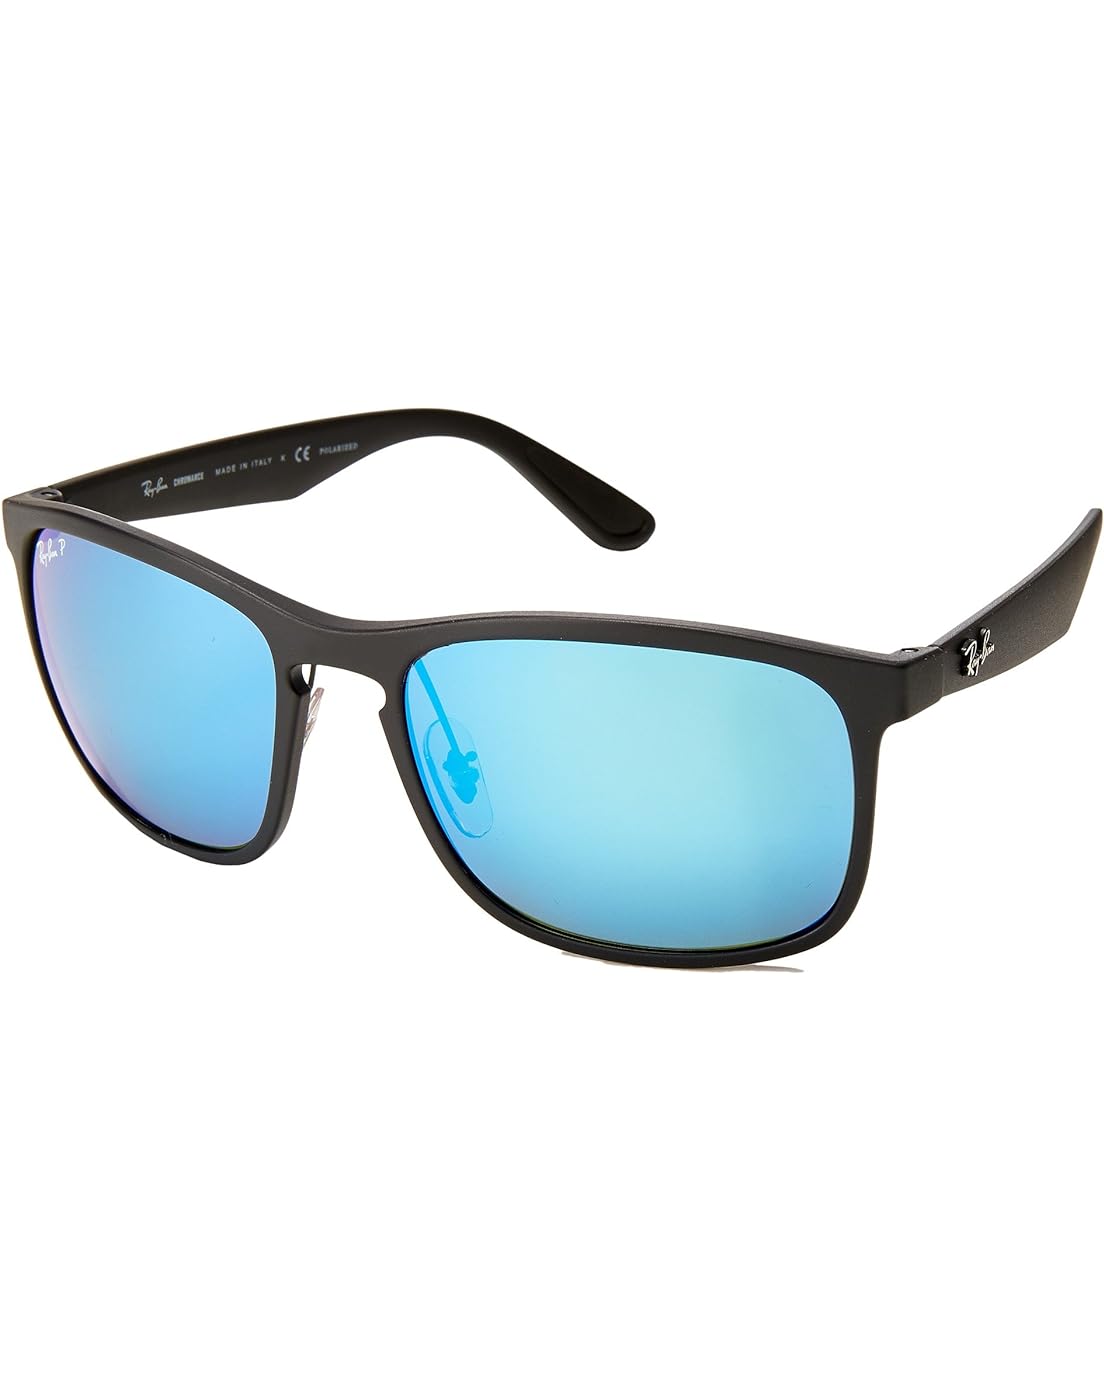 Ray-Ban 0RB4264 Polarized 58mm